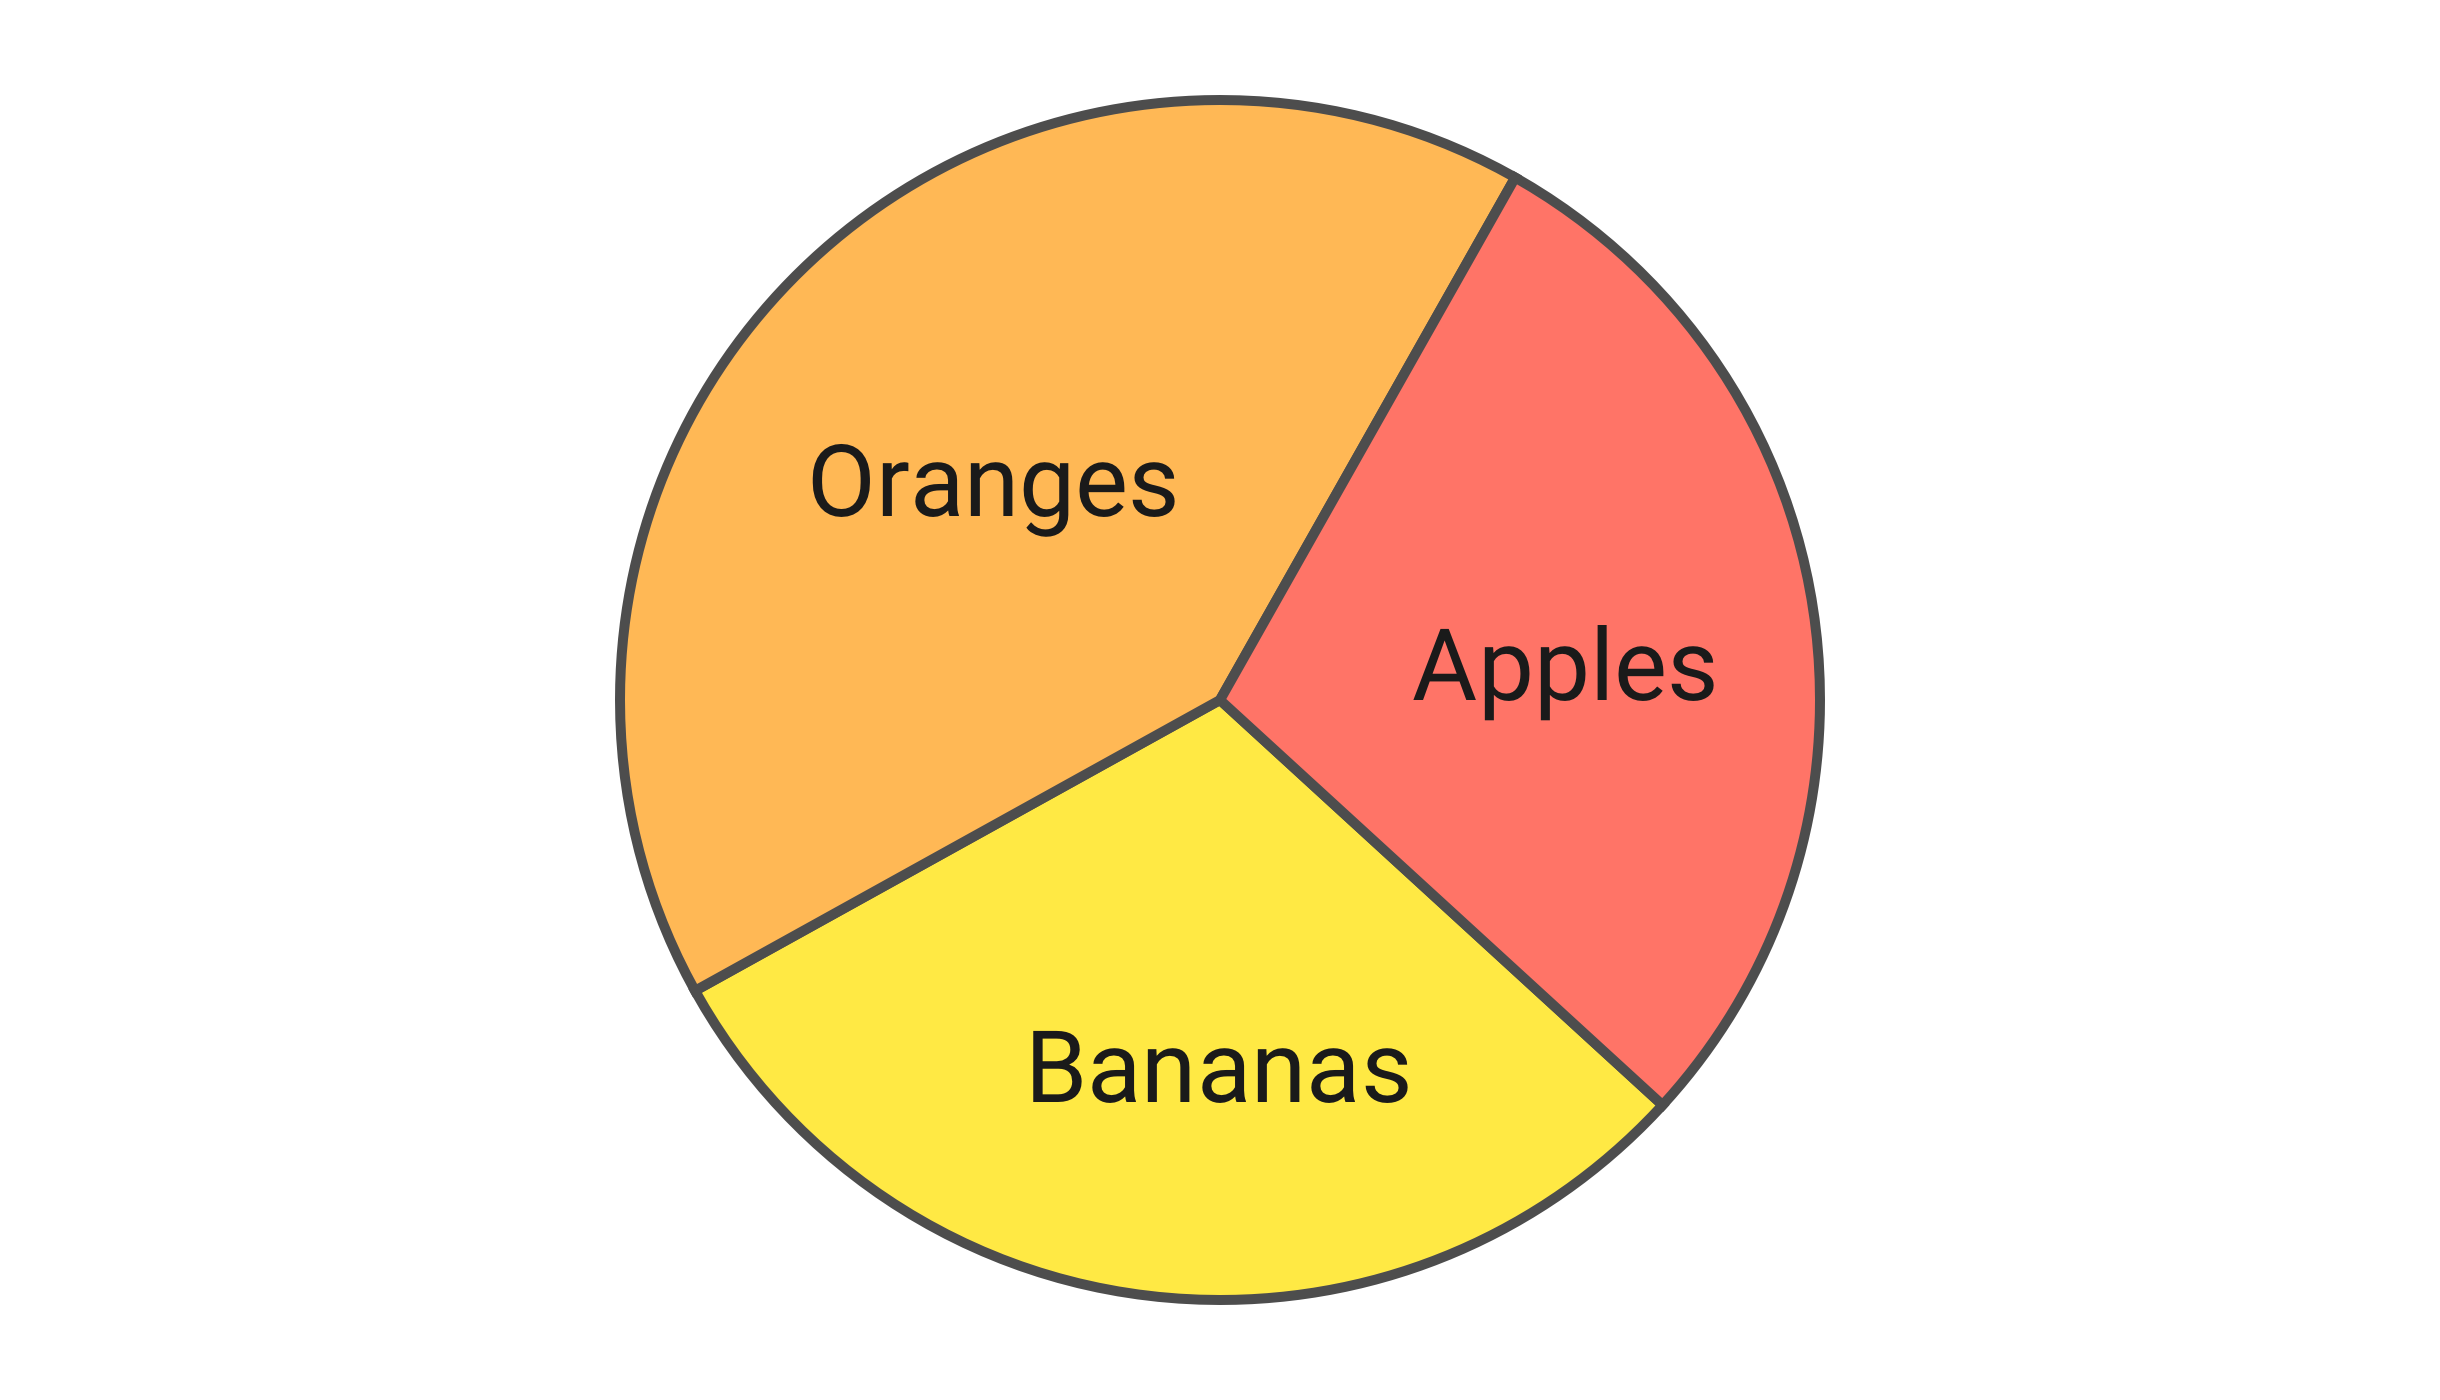 The same pie chart, without patterns but with the labels placed inside the three sections